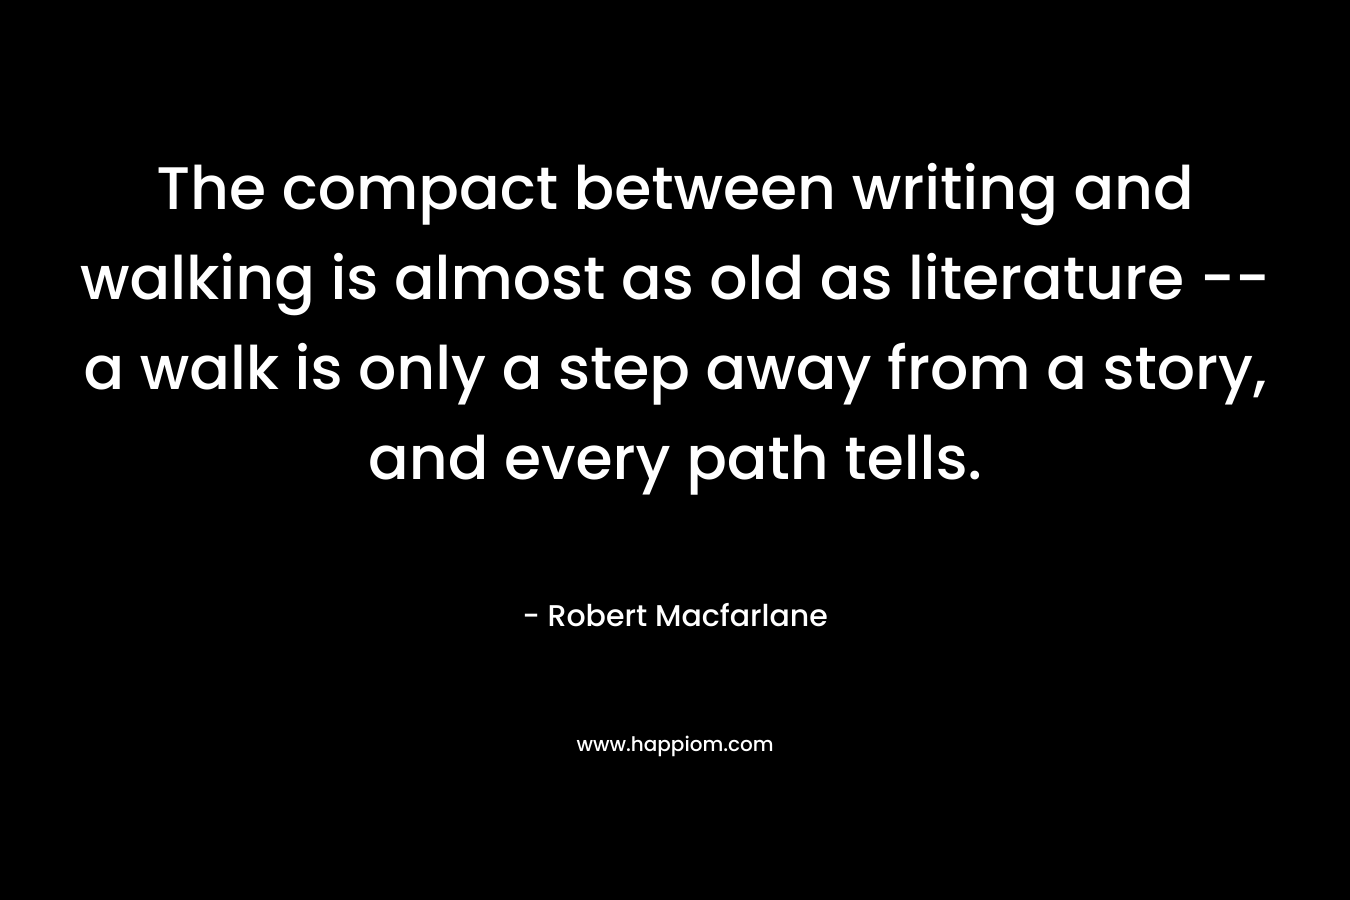 The compact between writing and walking is almost as old as literature -- a walk is only a step away from a story, and every path tells.